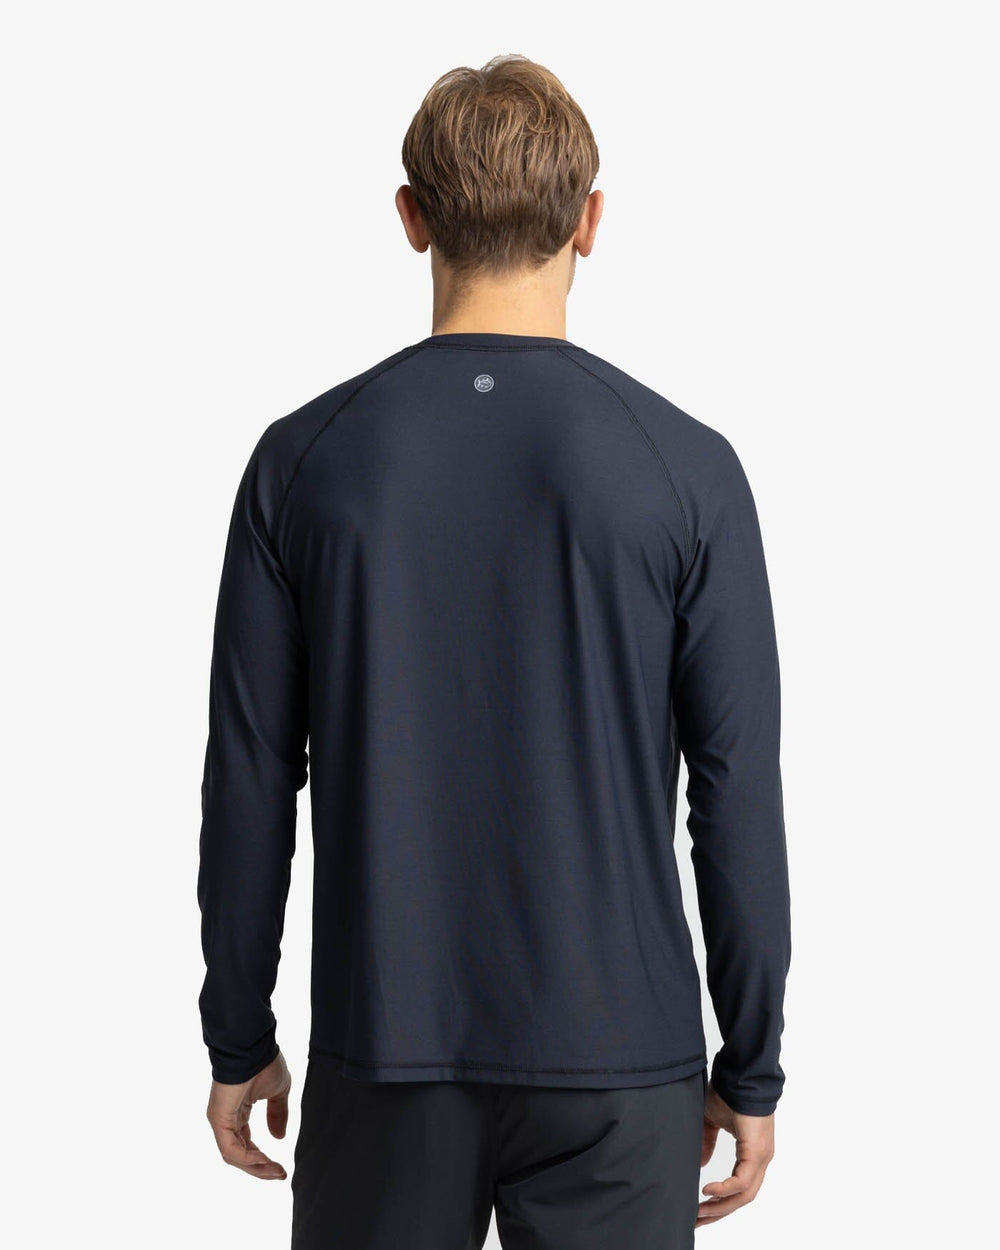 The back view of the Southern Tide brrr-illiant Performance Long Sleeve T-Shirt by Southern Tide - Caviar Black